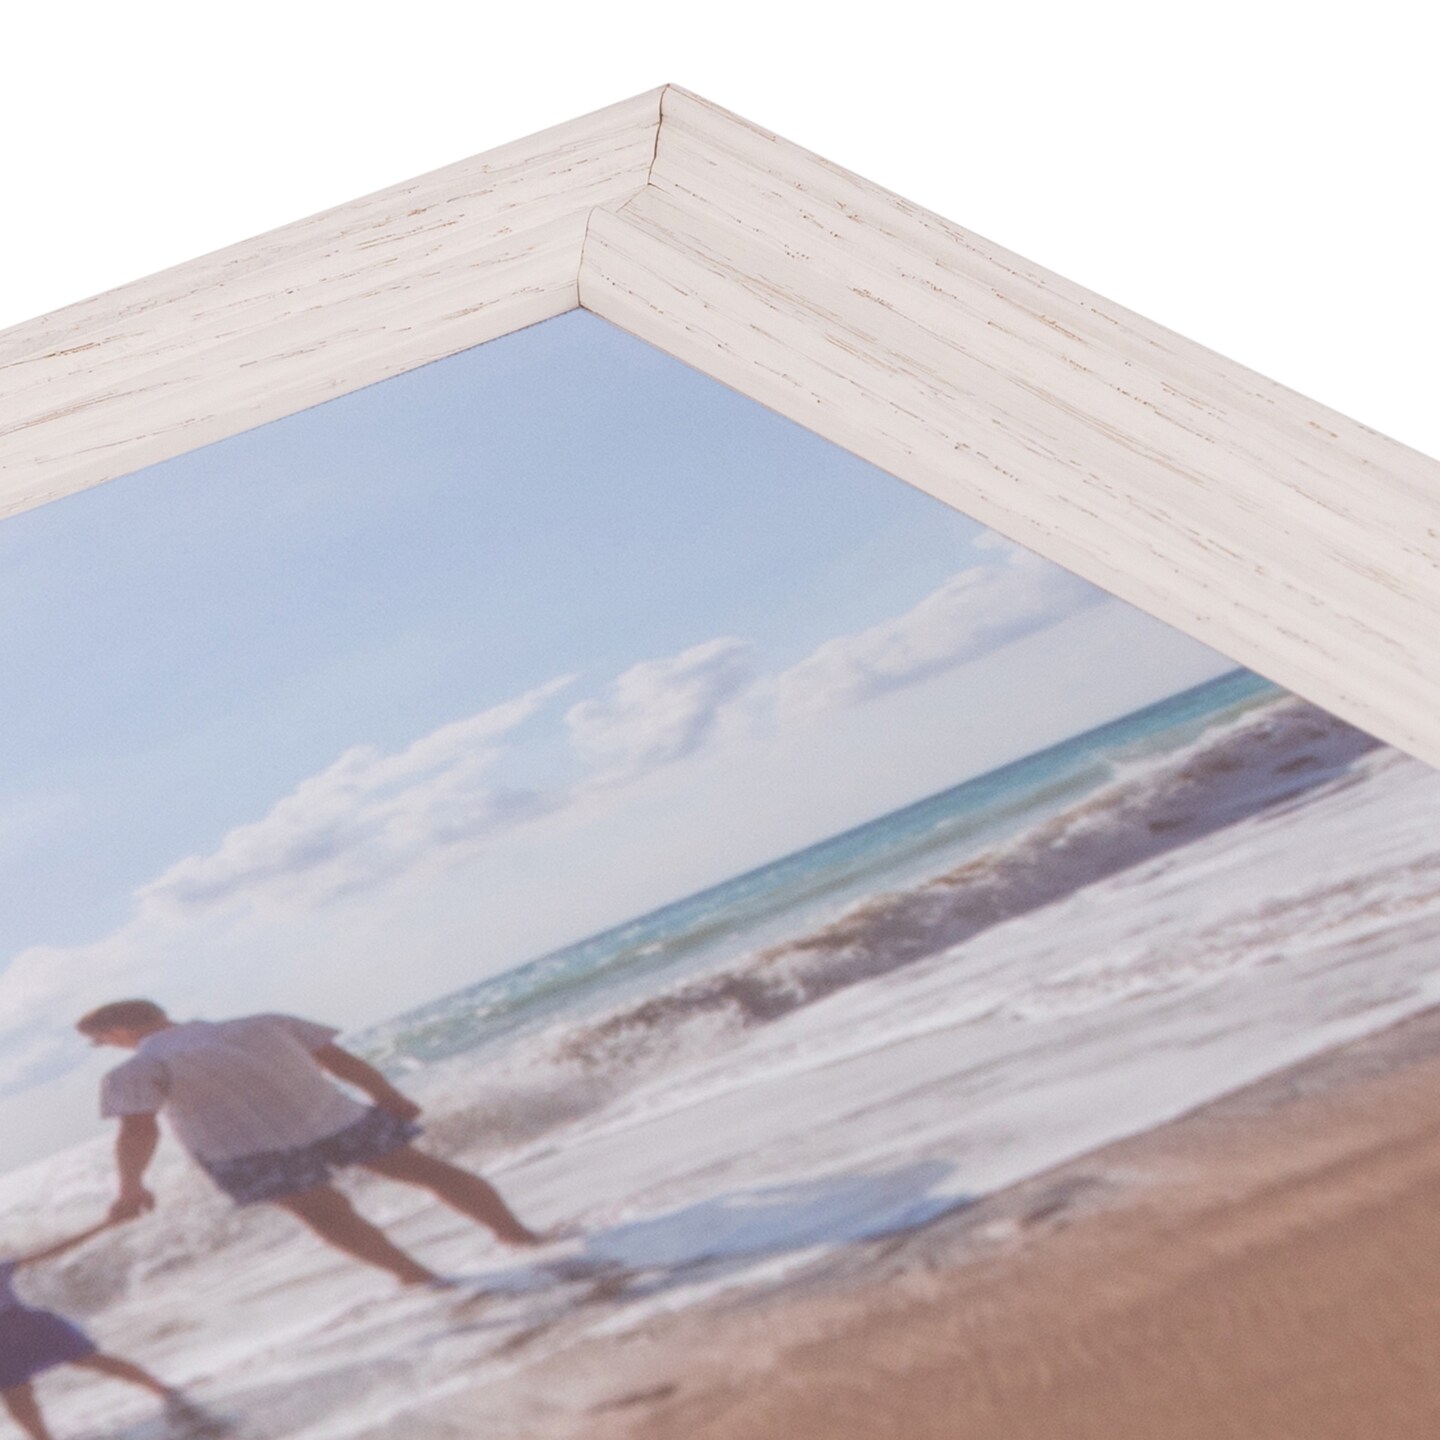 ArtToFrames 20x24 Inch  Picture Frame, This 1.5 Inch Custom Wood Poster Frame is Available in Multiple Colors, Great for Your Art or Photos - Comes with 060 Plexi Glass and  Corrugated Backing (A14OW)